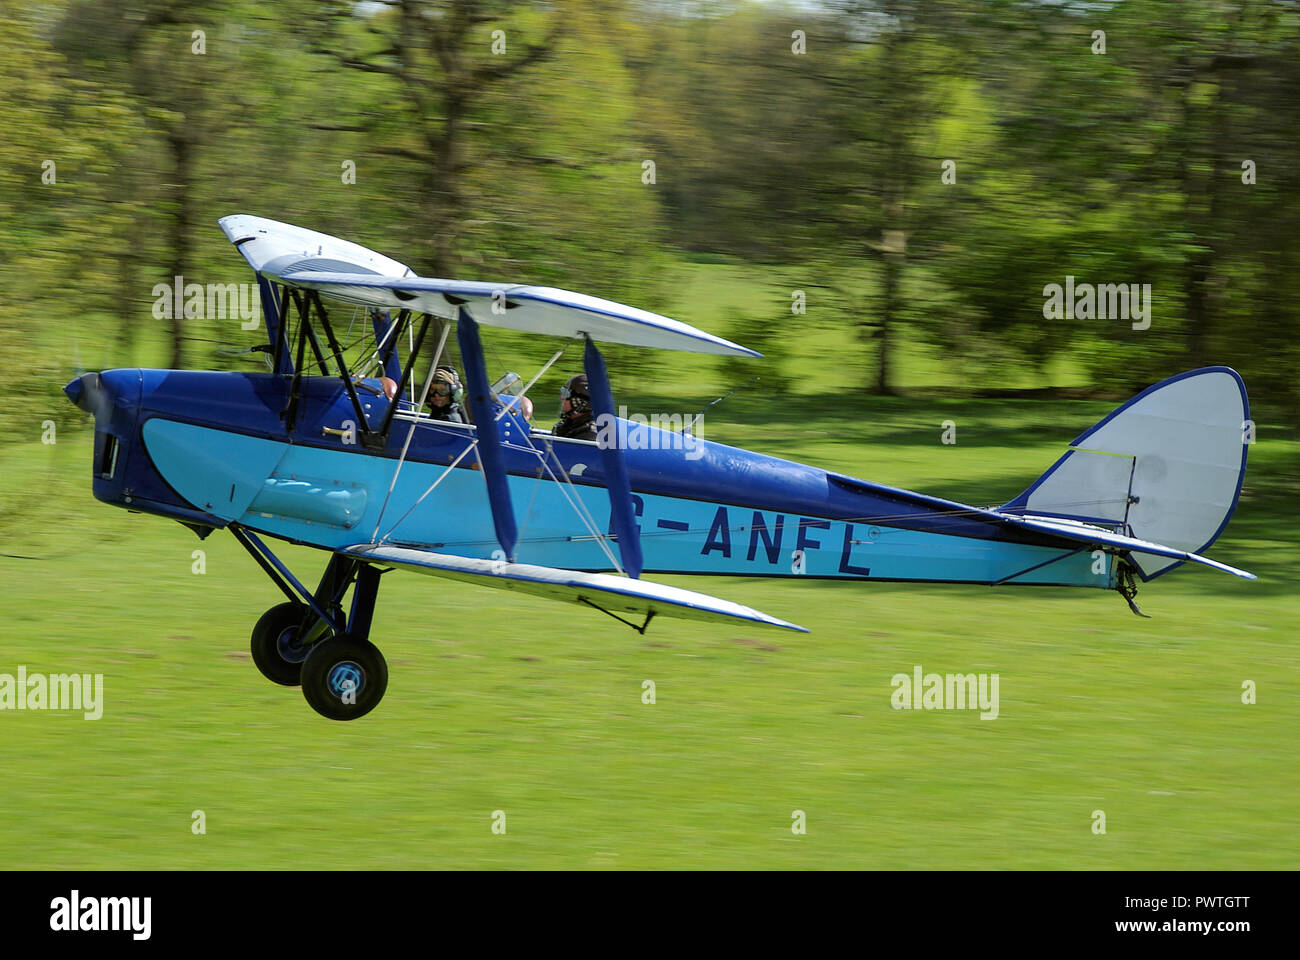 de Havilland DH82A Tiger Moth G-ANFL biplane plane taking off from countryside grass air strip with trees. Henham Park in Suffolk, UK Stock Photo